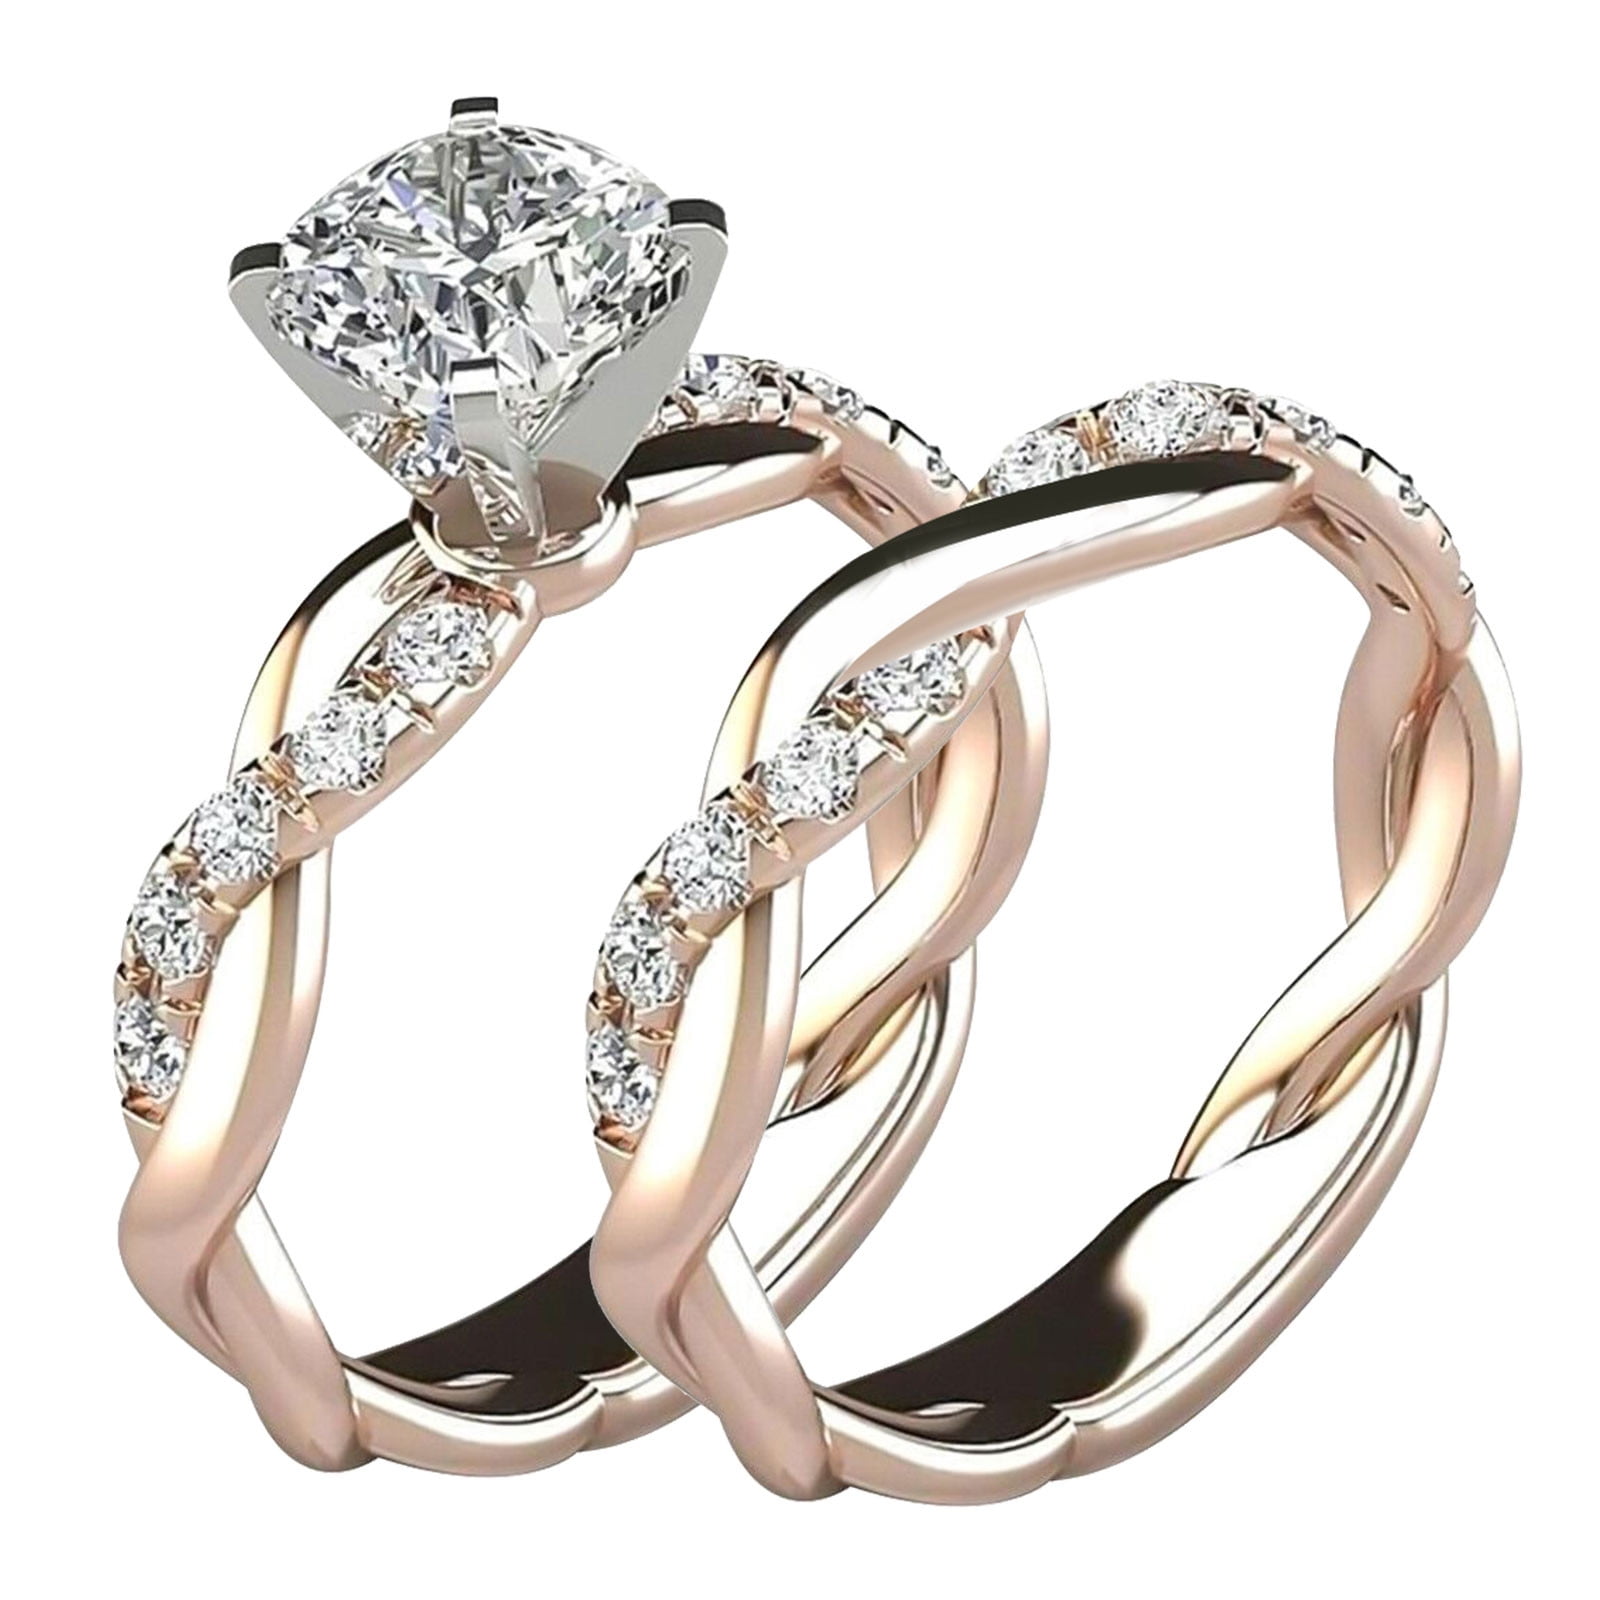 Luxury 3 Pcs Ring Sets For Women Rose Gold Filled Champagne